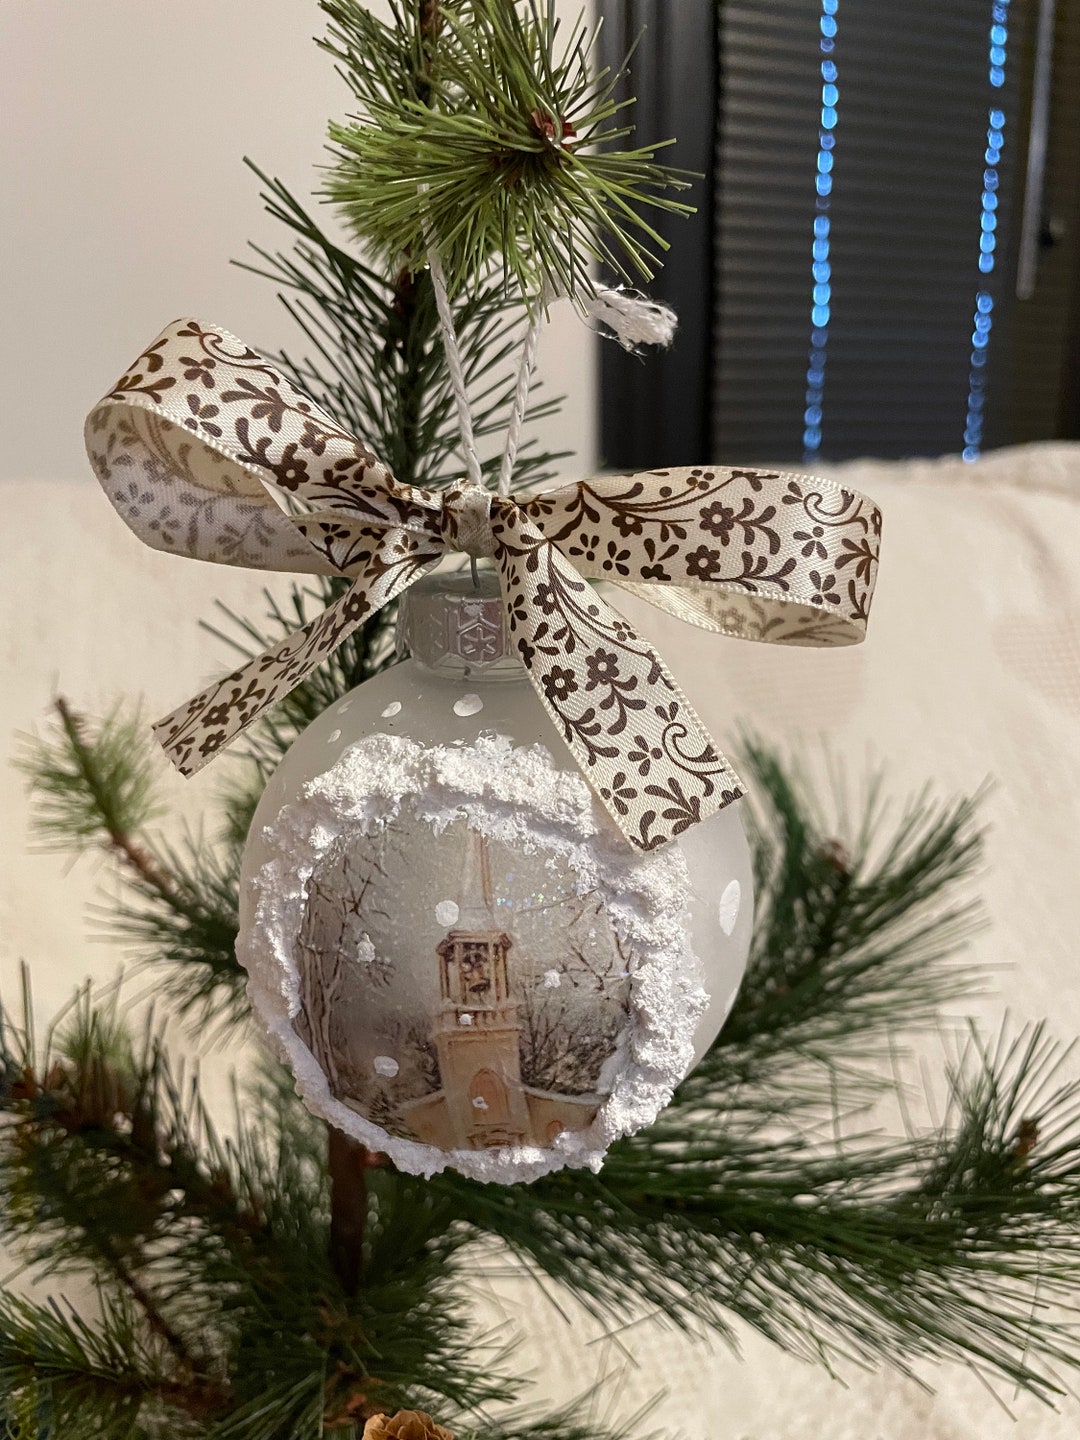 Roundup: 5 Button Christmas Ornament Projects - Curbly